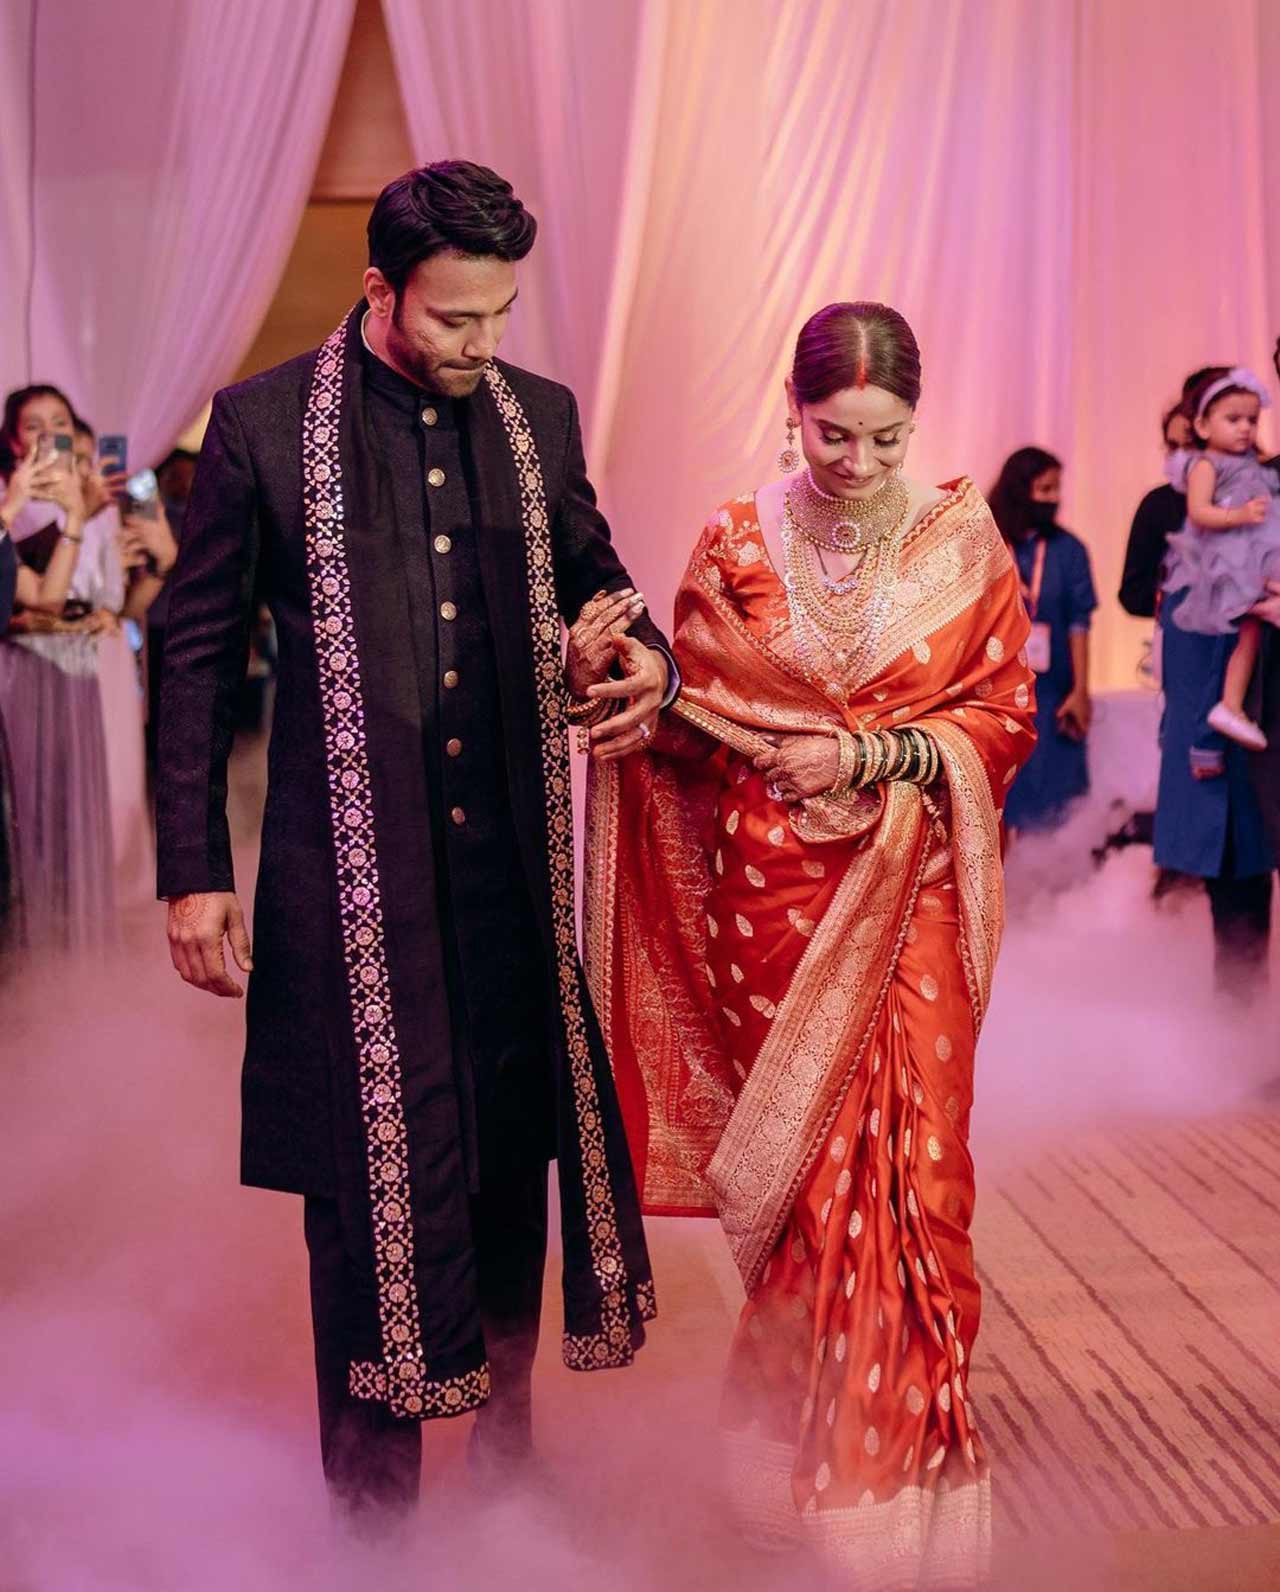 Ankita Lokhande was seen wearing a golden lehenga, and we couldn't take our eyes off the newly wedded bride of the television industry. Vicky Jain too showed off his dapper side in a white sherwani.